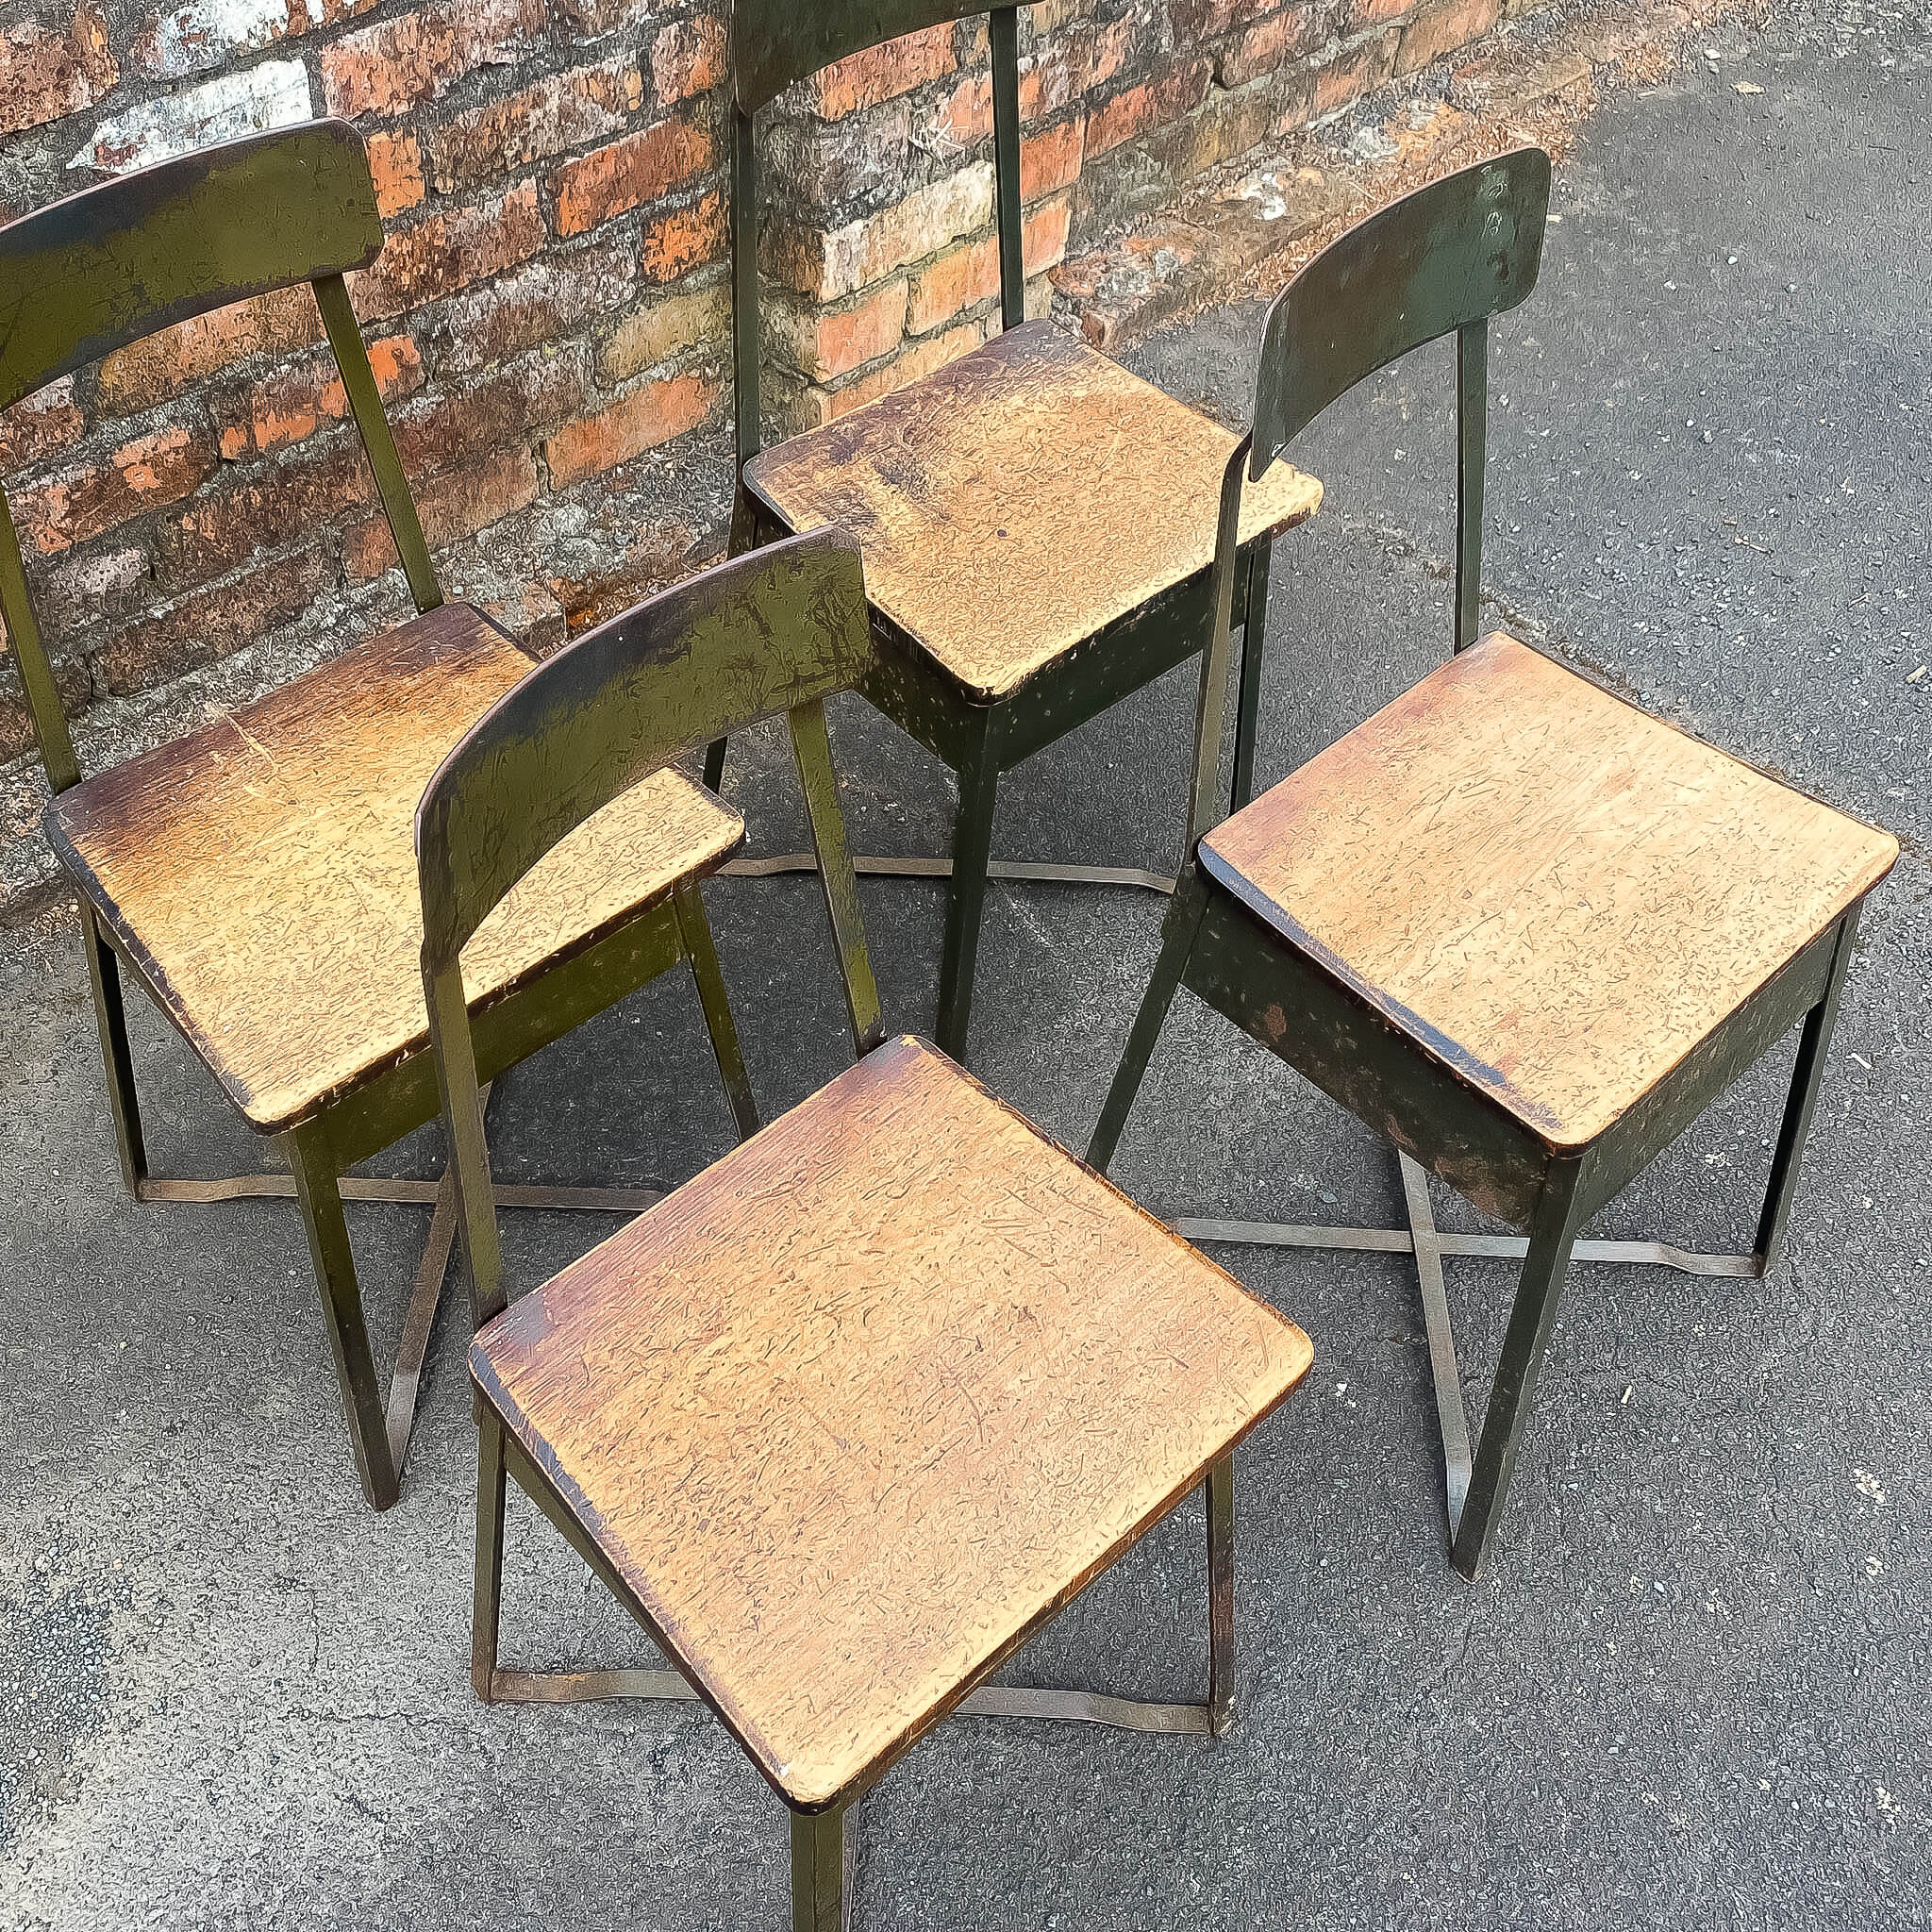 Industrial Chairs